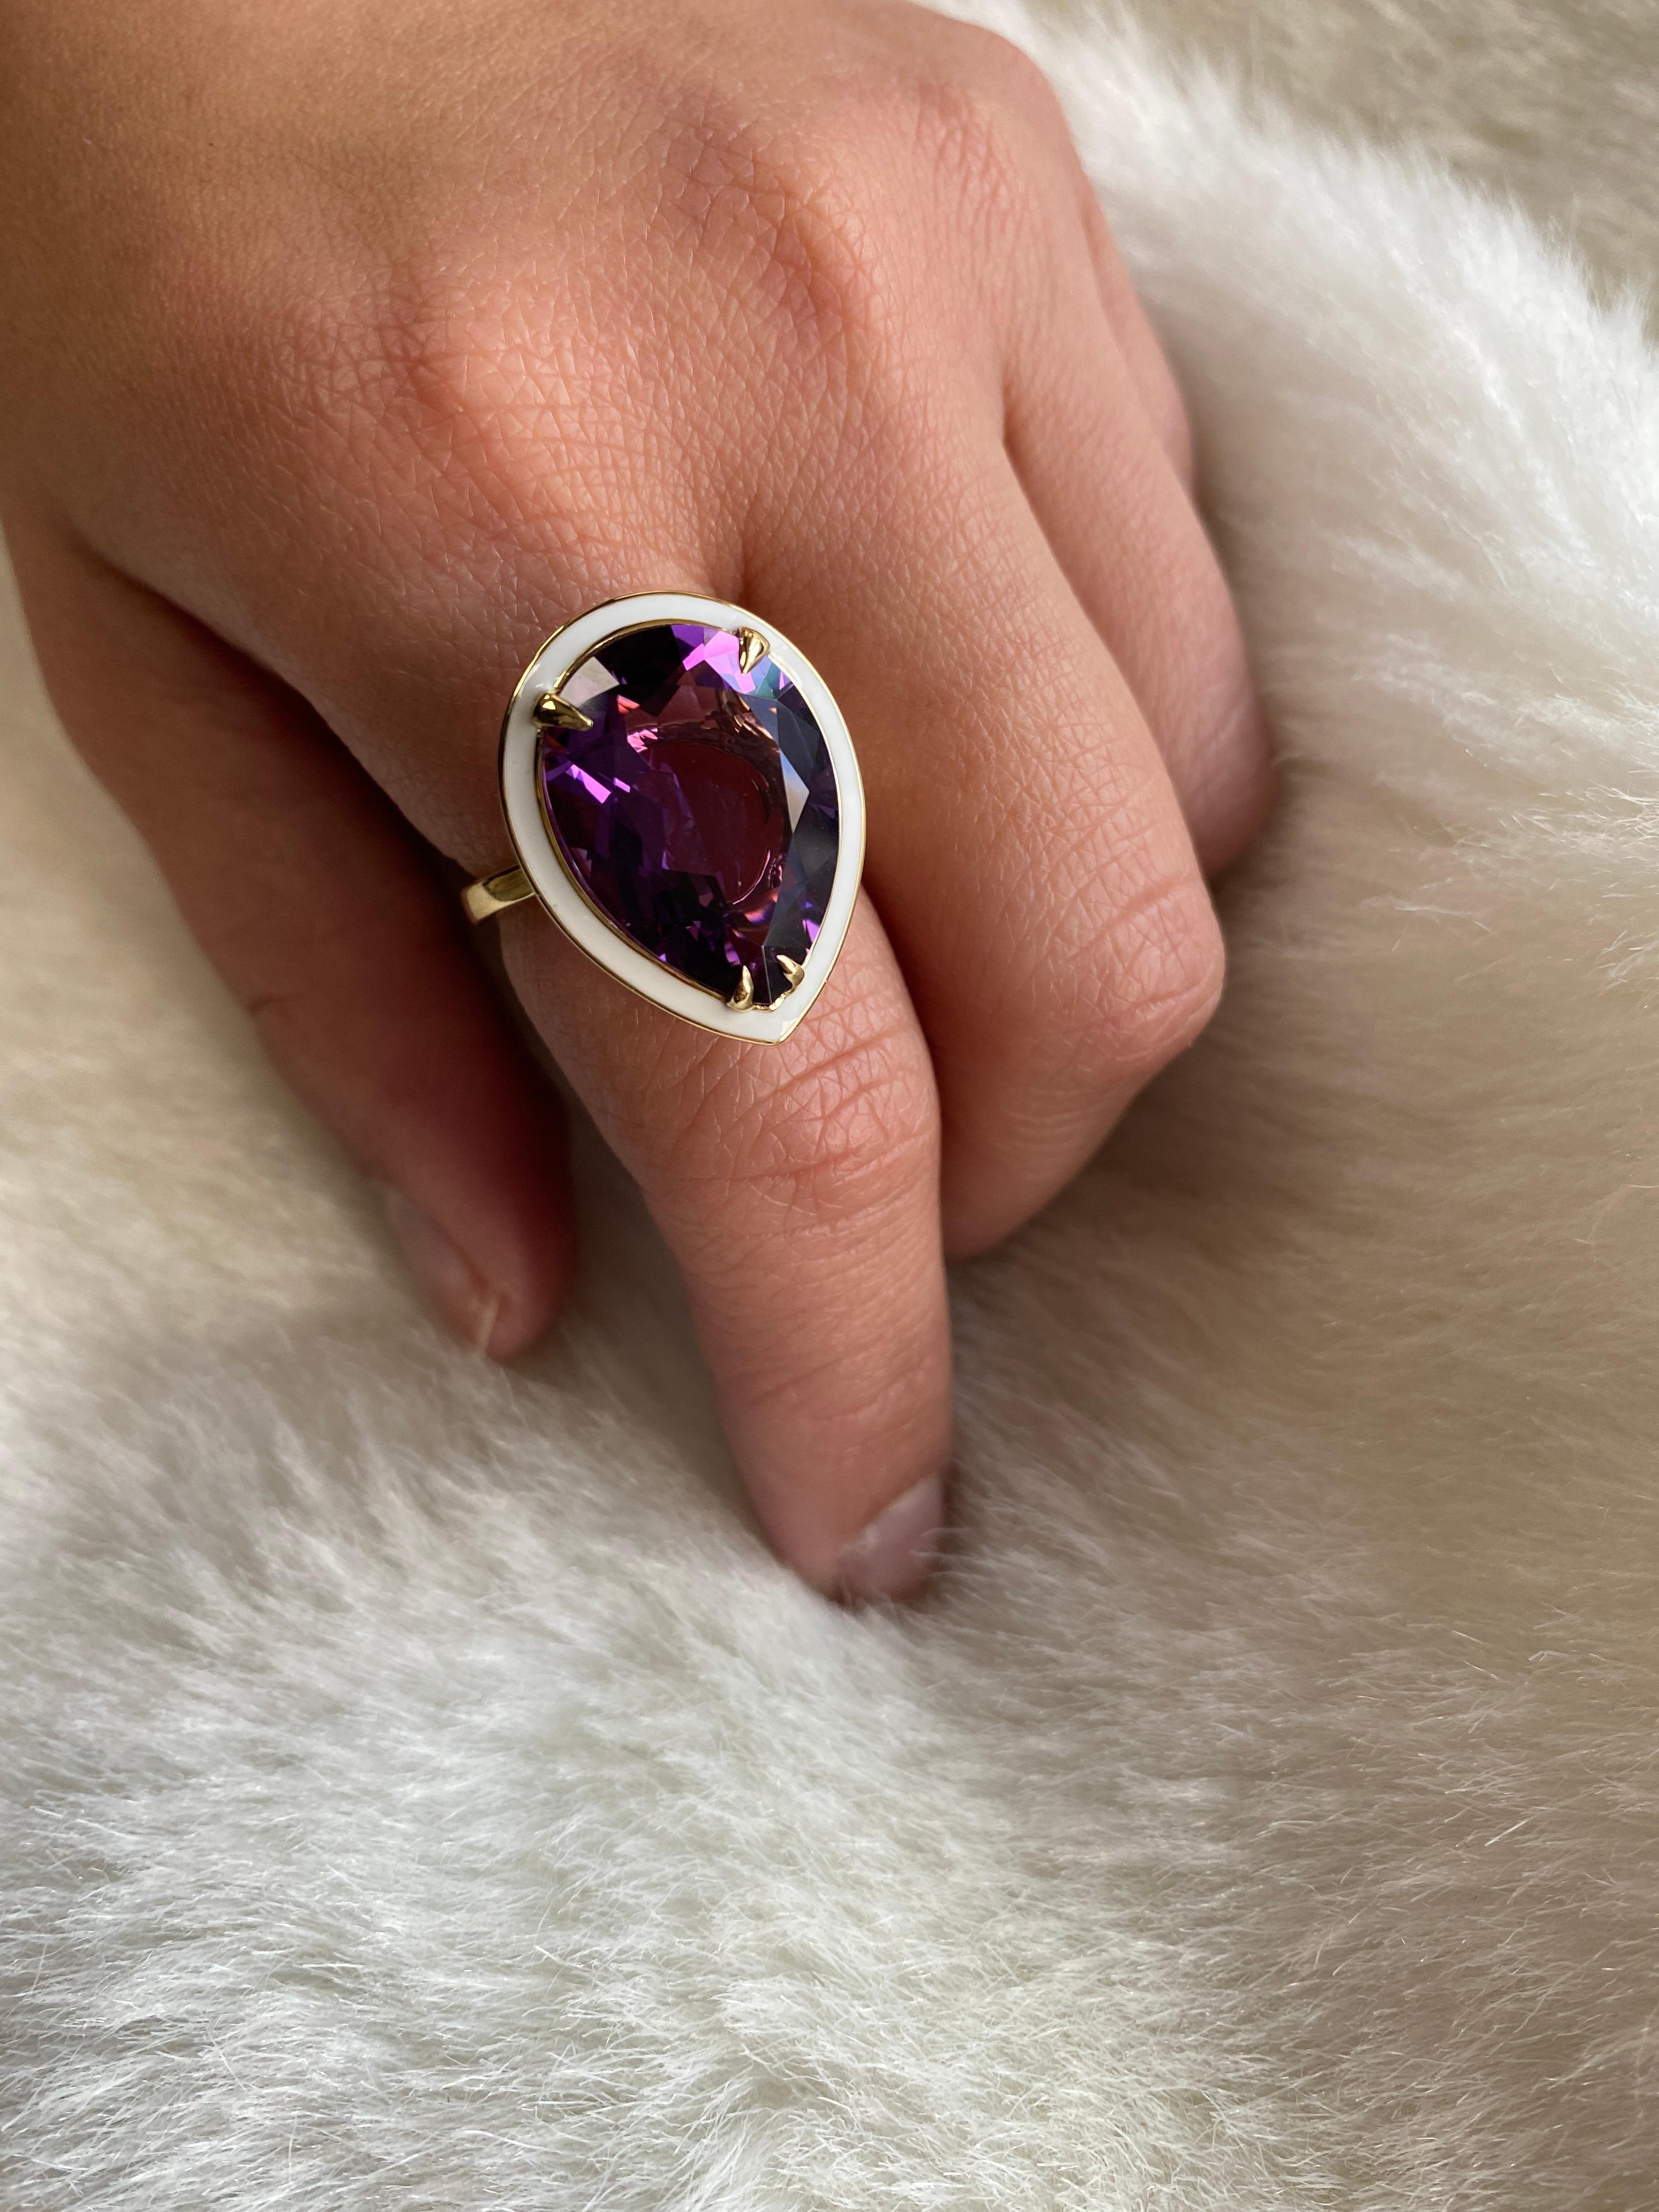 Pear Shape Amethyst  Ring With White Enamel  in 18K Yellow Gold, from 'G-One' Collection. The combination of enamel and Amethyst makes this ring very unique and a wonderful piece to add to your personal collection.

* Gemstone size: 18 x 13 mm
*